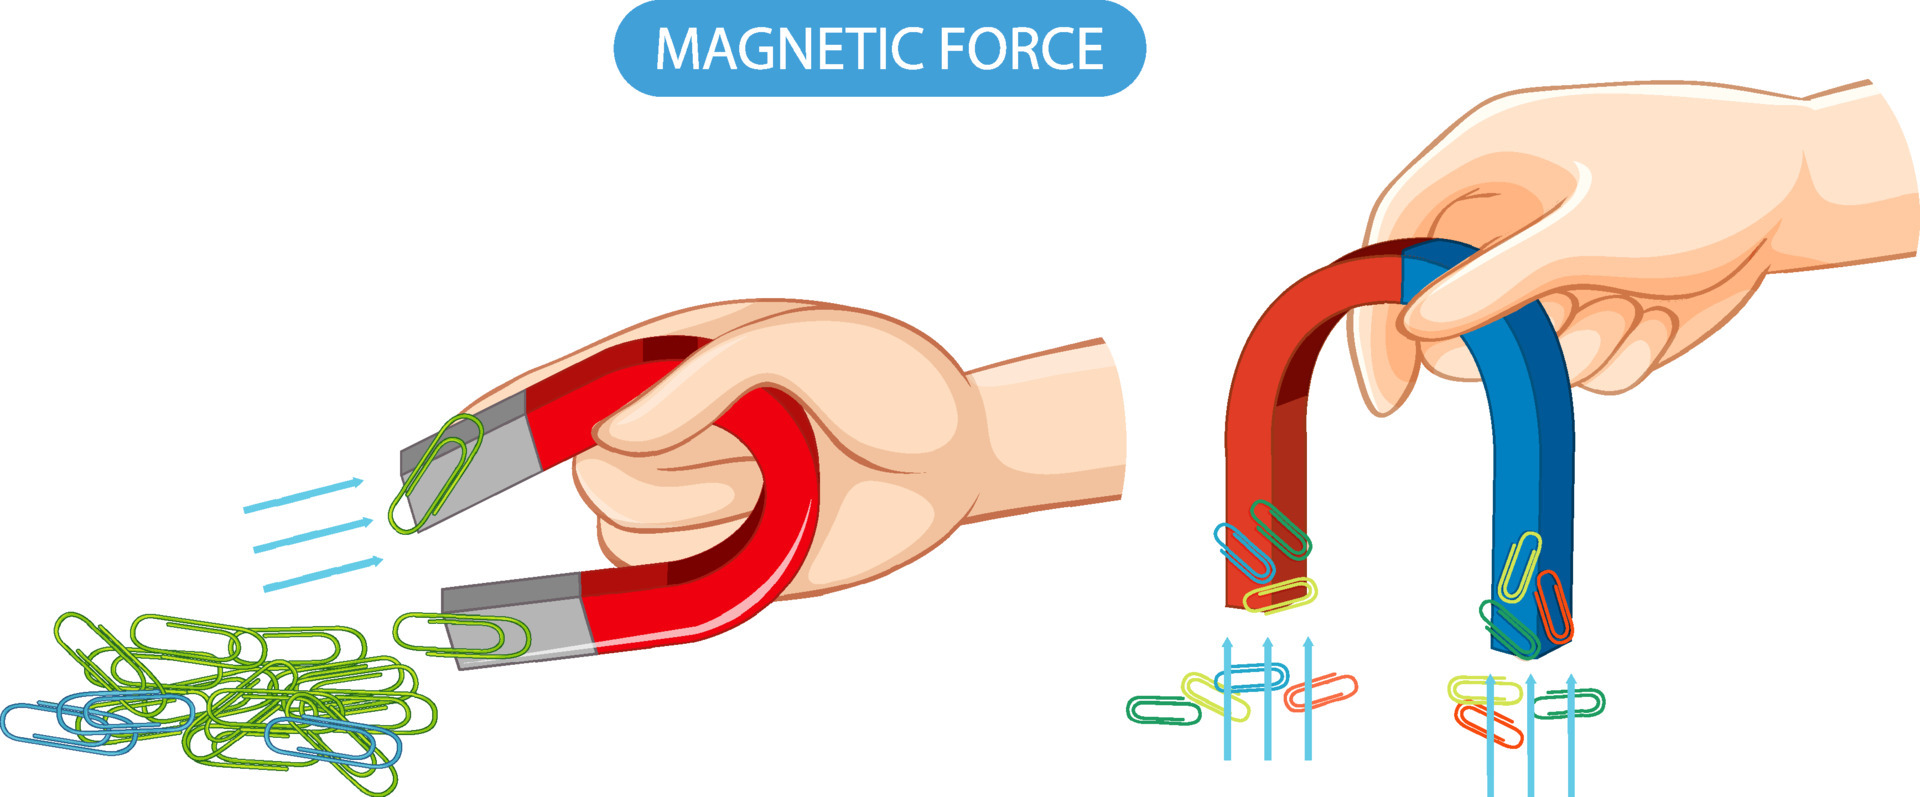 13-mind-blowing-facts-about-magnetic-force